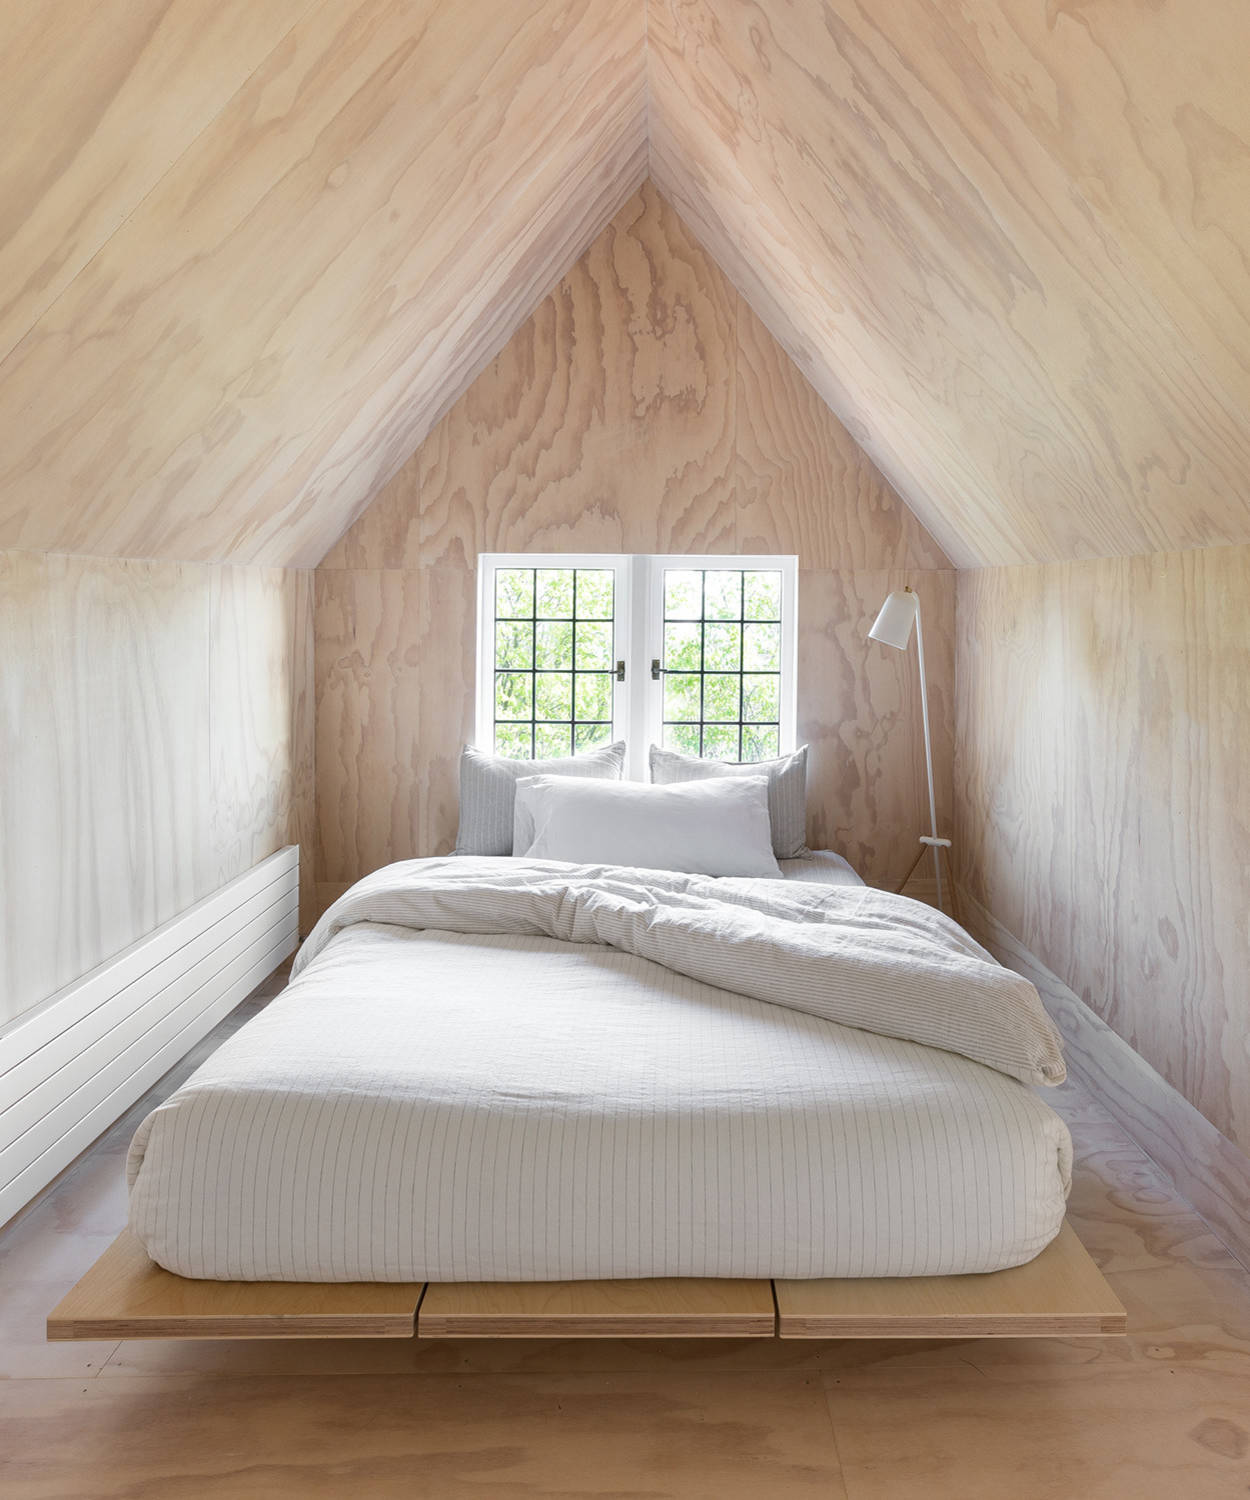 75 Plywood Floor Bedroom Ideas You'll Love - July, 2023 | Houzz